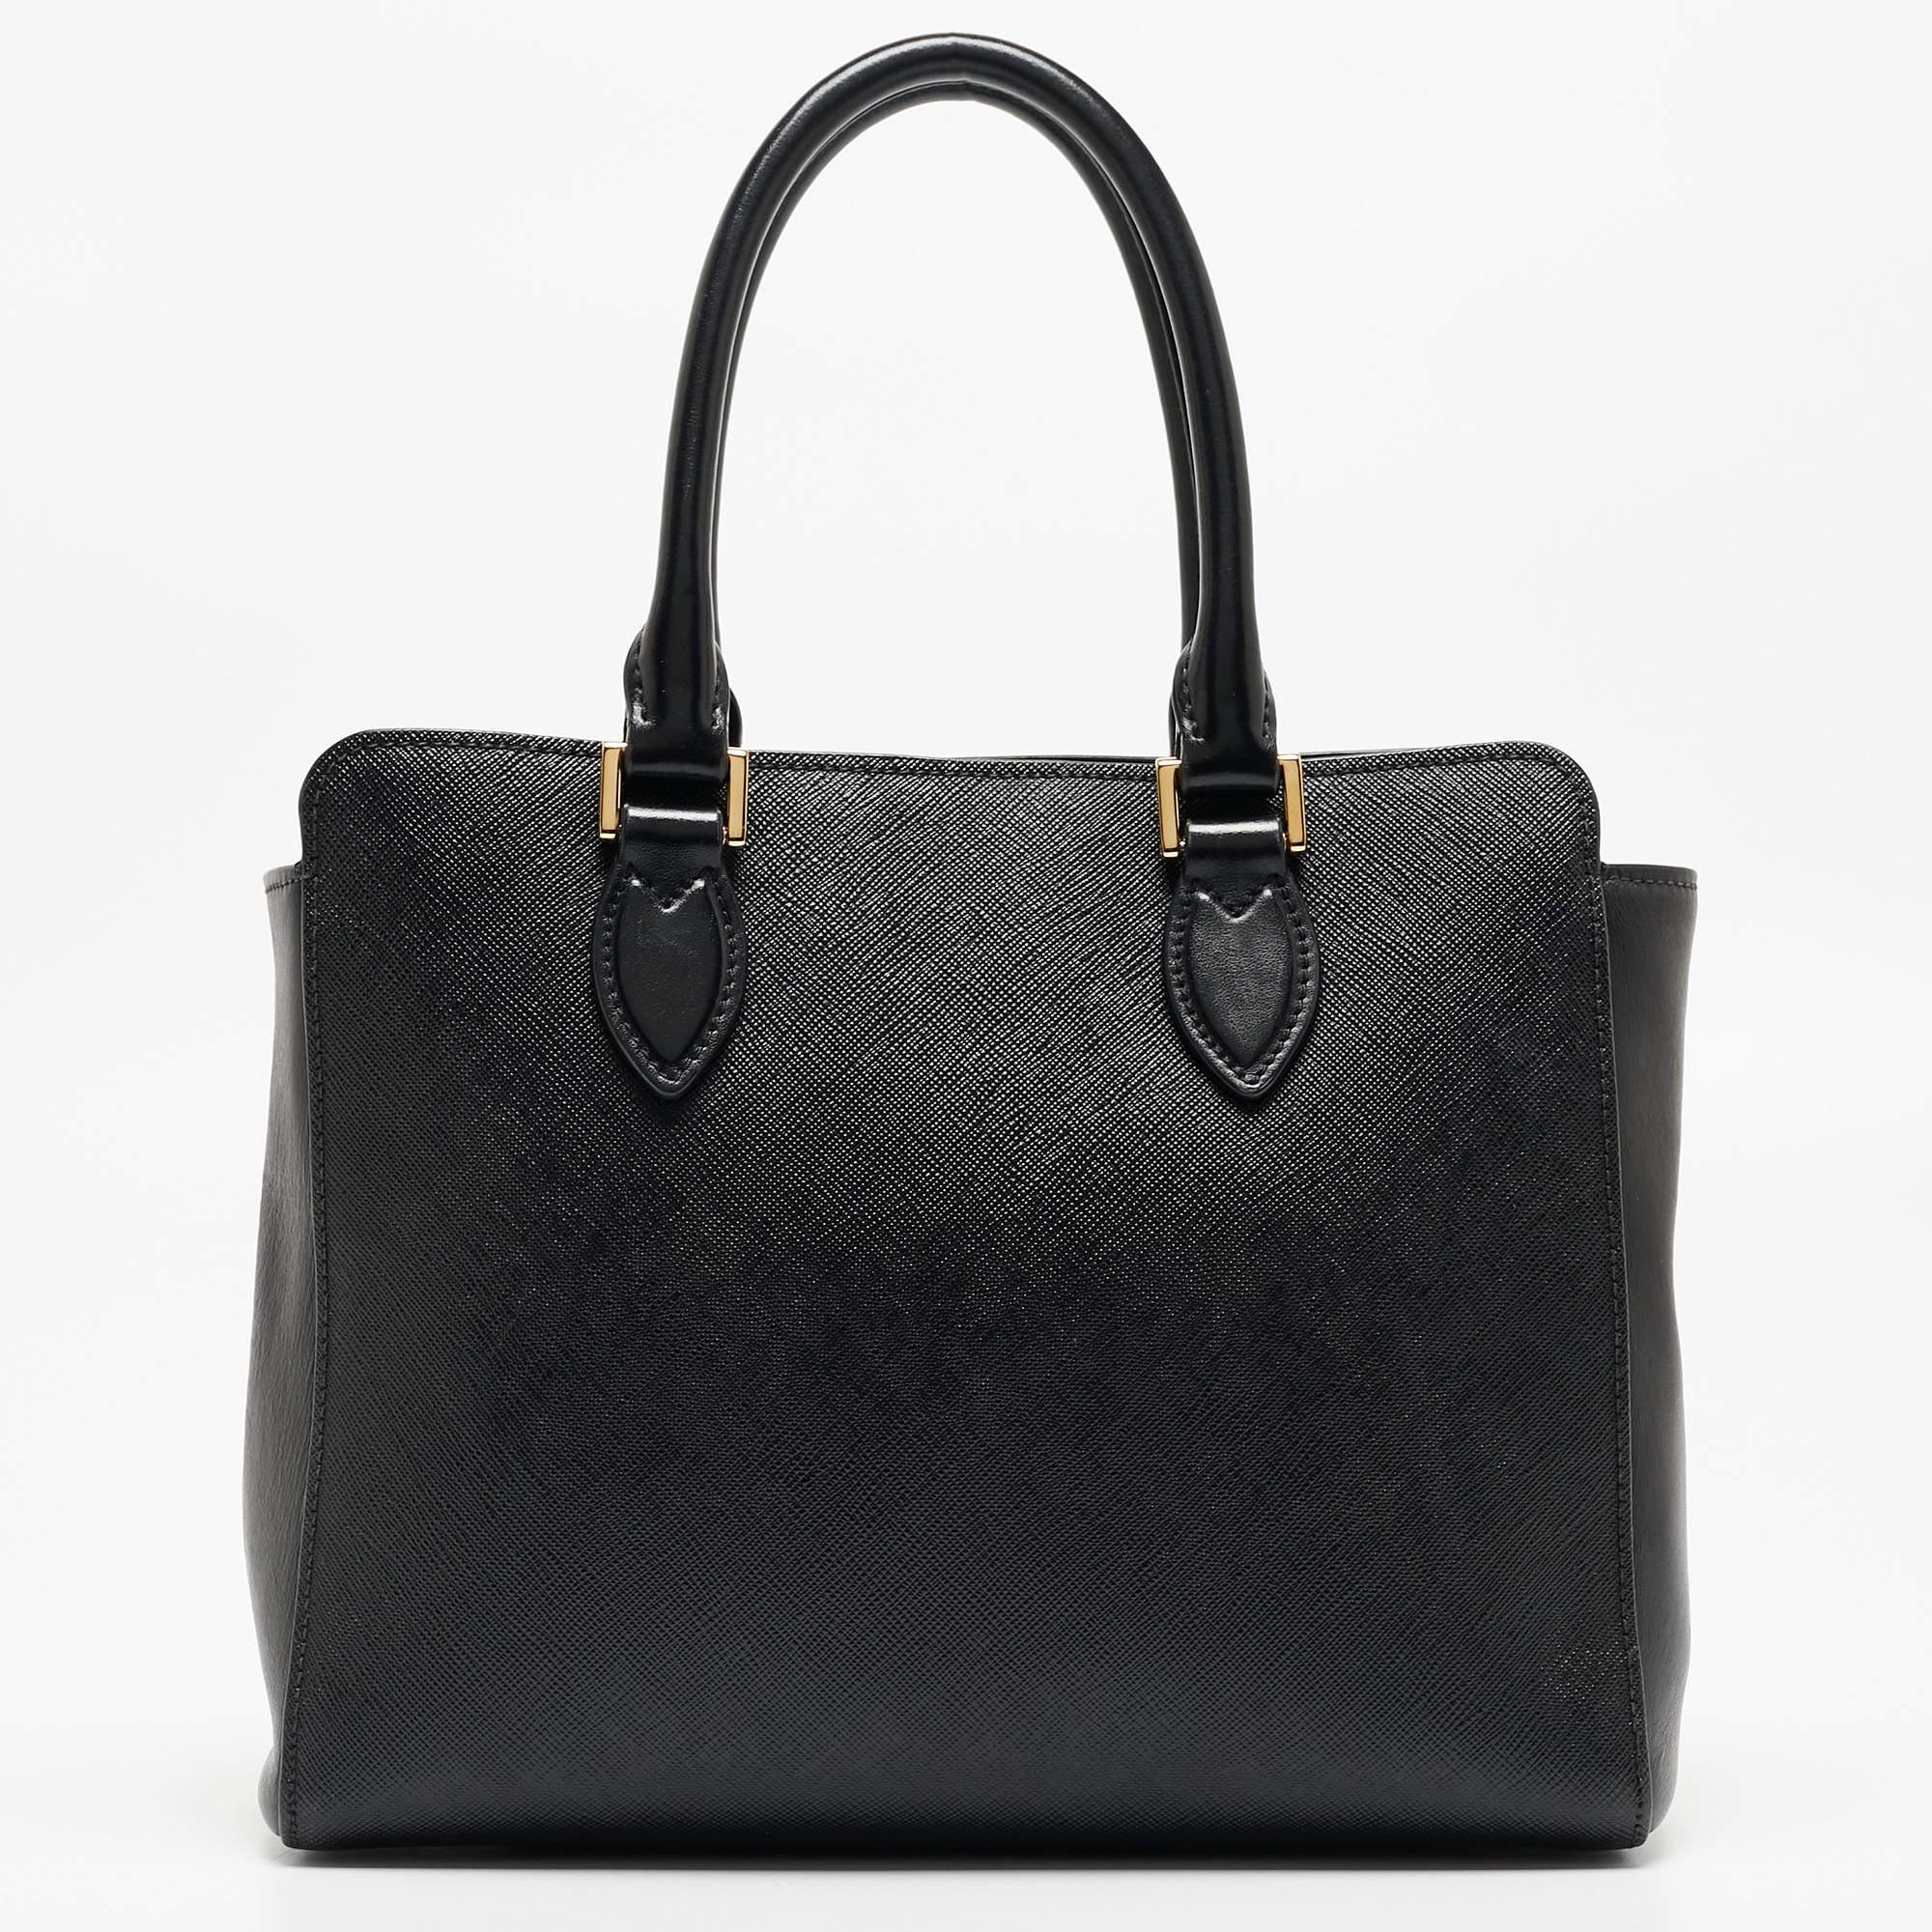 Be it your daily commute to work, shopping sprees, and vacations, a Prada tote bag will never fail you. This designer creation is made to last and assist you in your fashion-filled days.

Includes: Detachable Strap